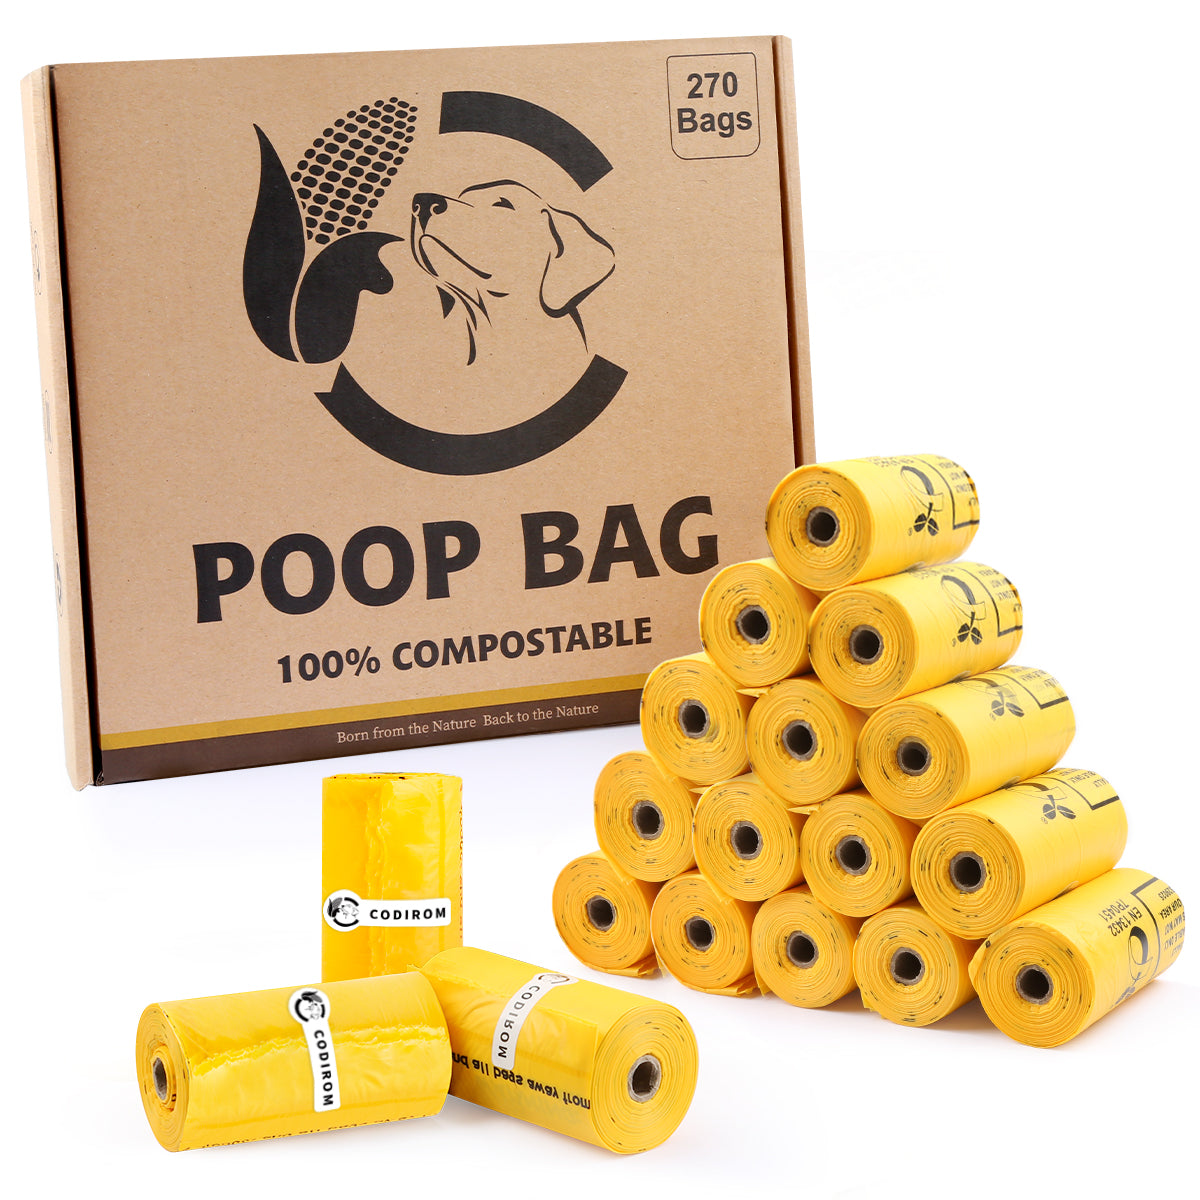 Certified Compostable Dog Poop Bags, 270 Count Maize Yellow, 15 Doggy Bags Per Roll (18 rolls)